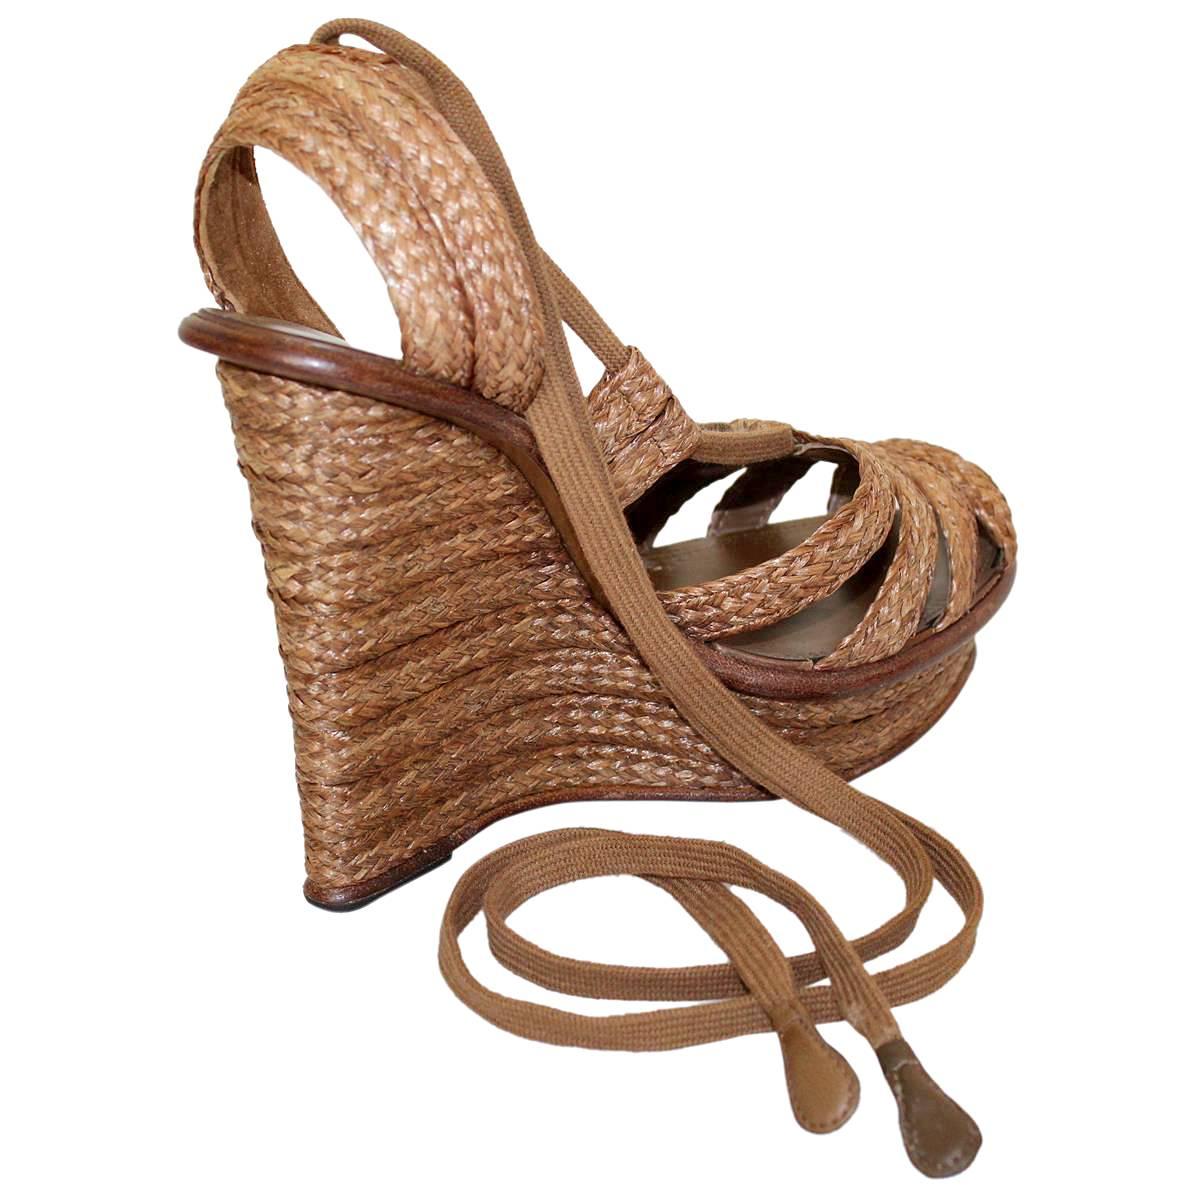 Beautiful Bottega Veneta wedge sandal
Straw
Noisette color
Ankle laces
Heel height cm 12,5 (4.92 inches), 2 cm plateau (0.78 inches)
Made in Italy
Worldwide express shipping included in the price !